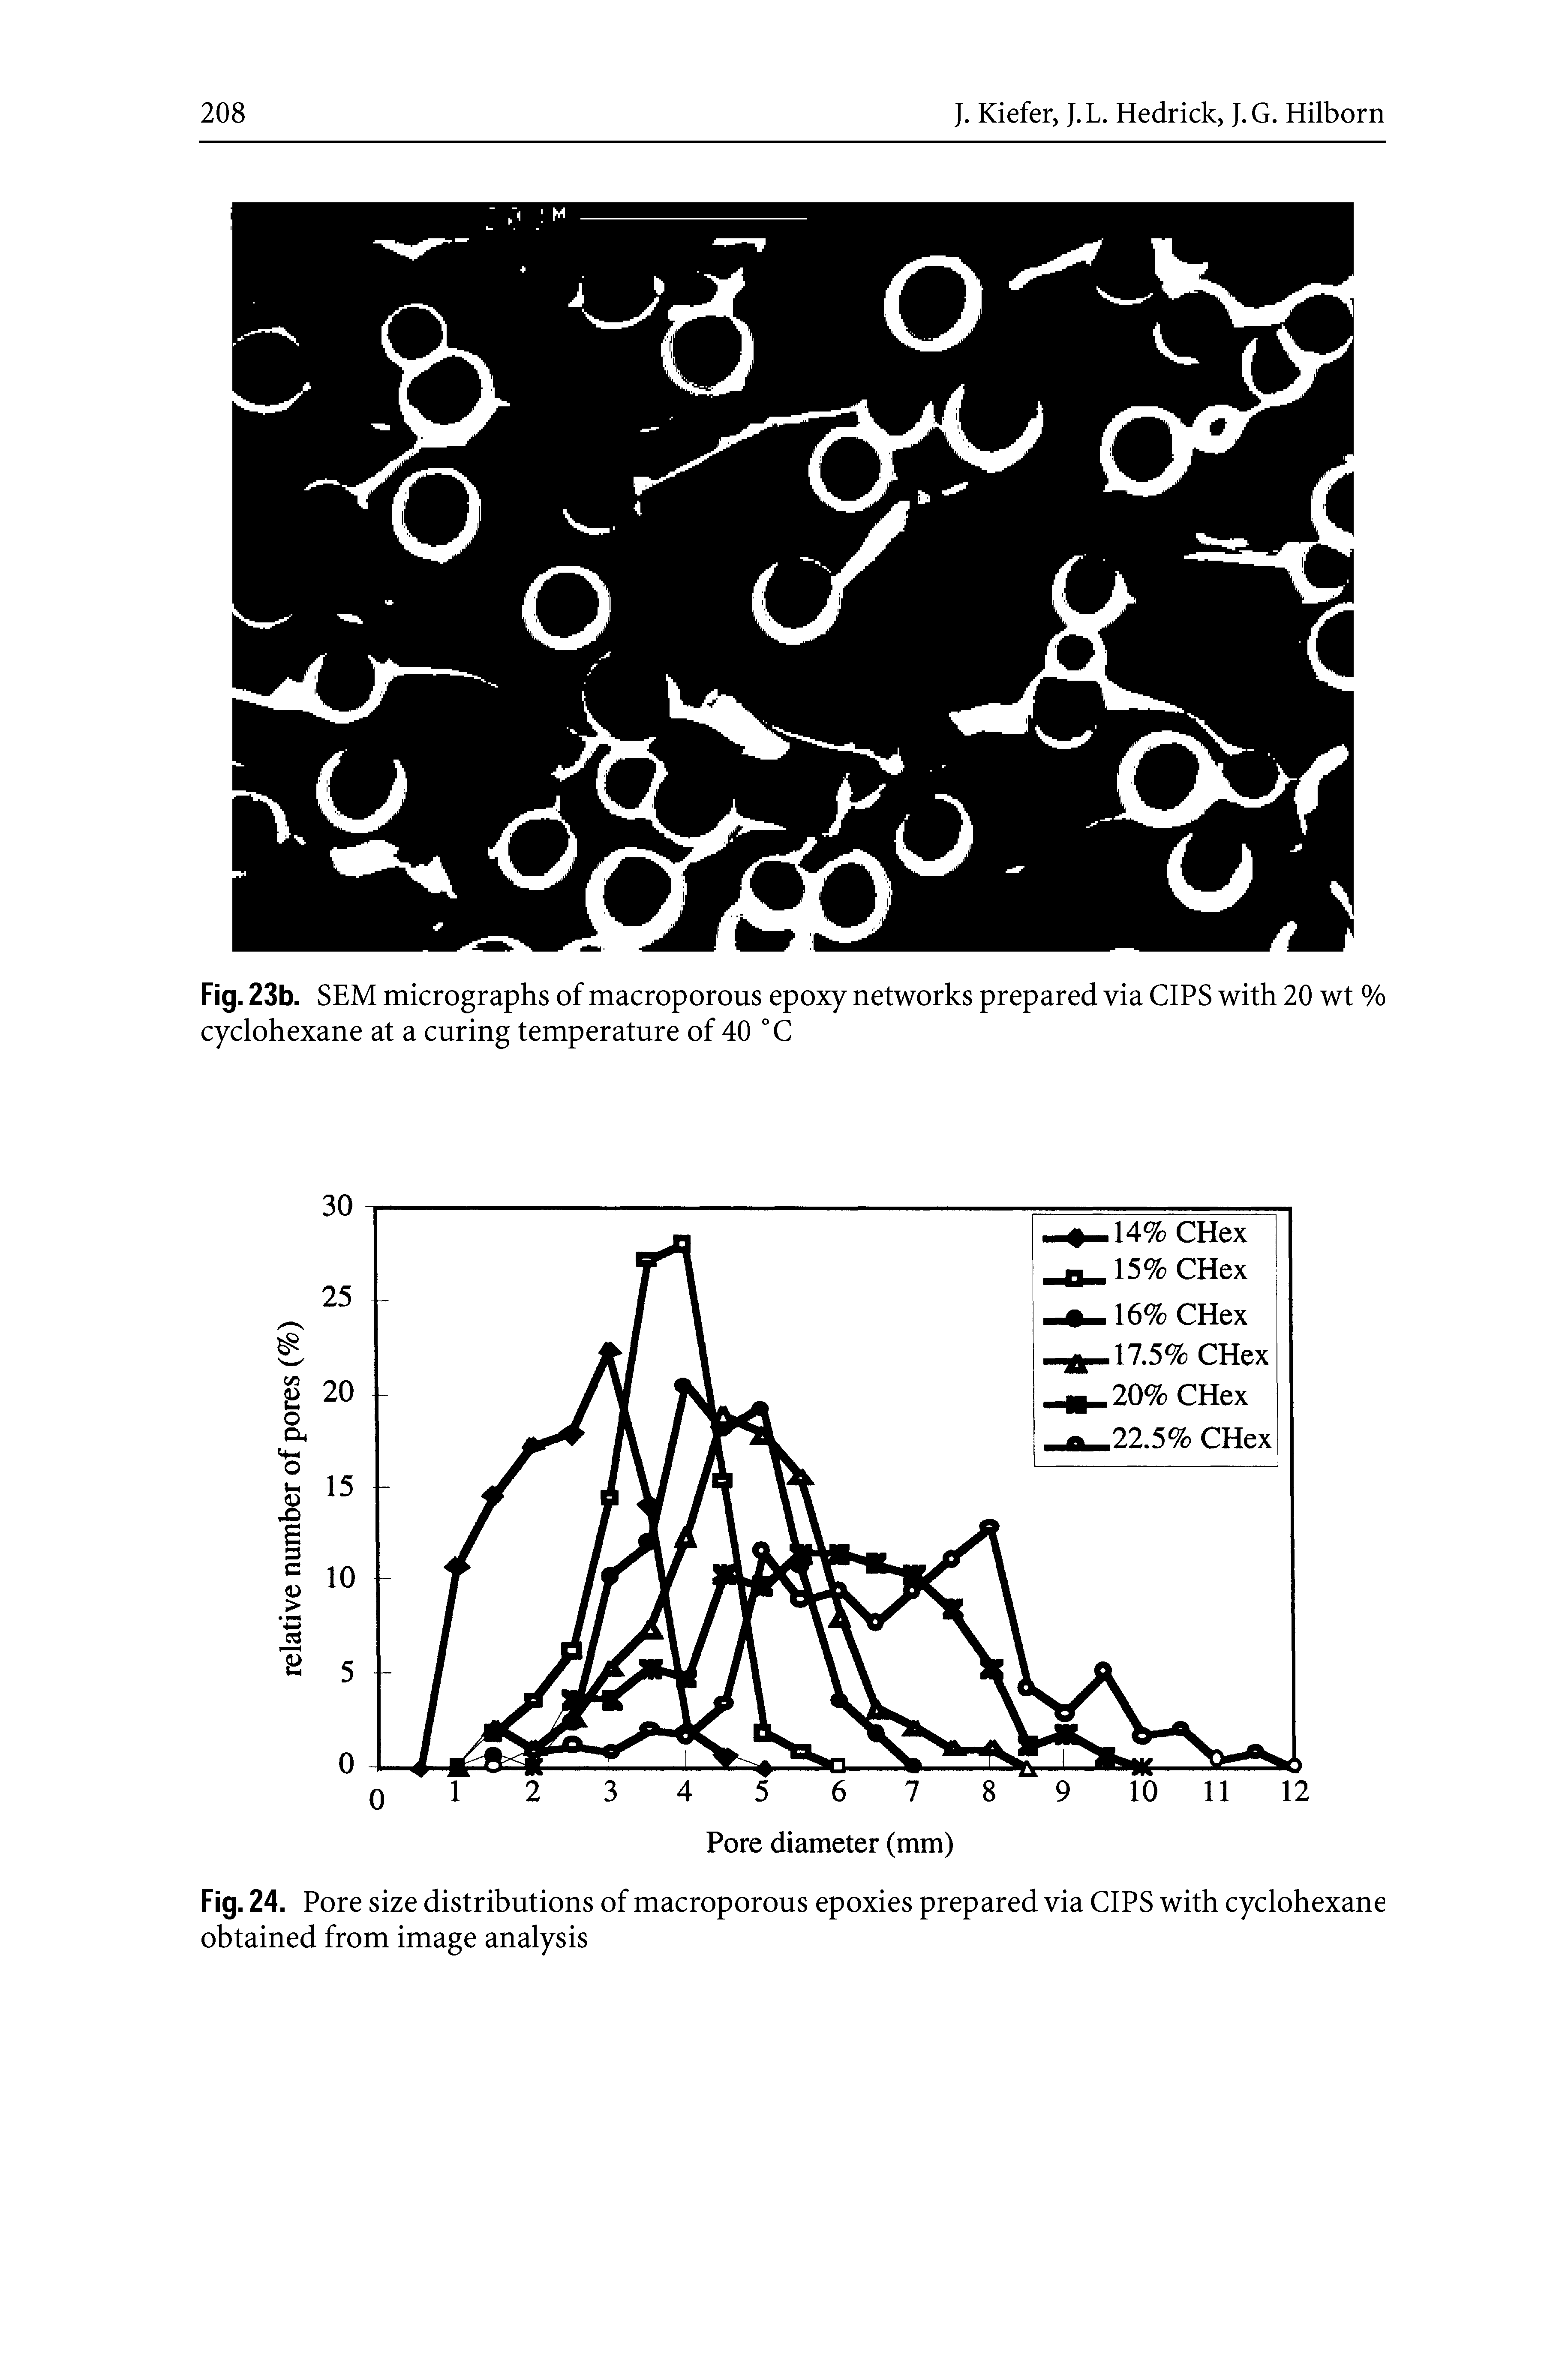 Fig. 24. Pore size distributions of macroporous epoxies prepared via CIPS with cyclohexane obtained from image analysis...